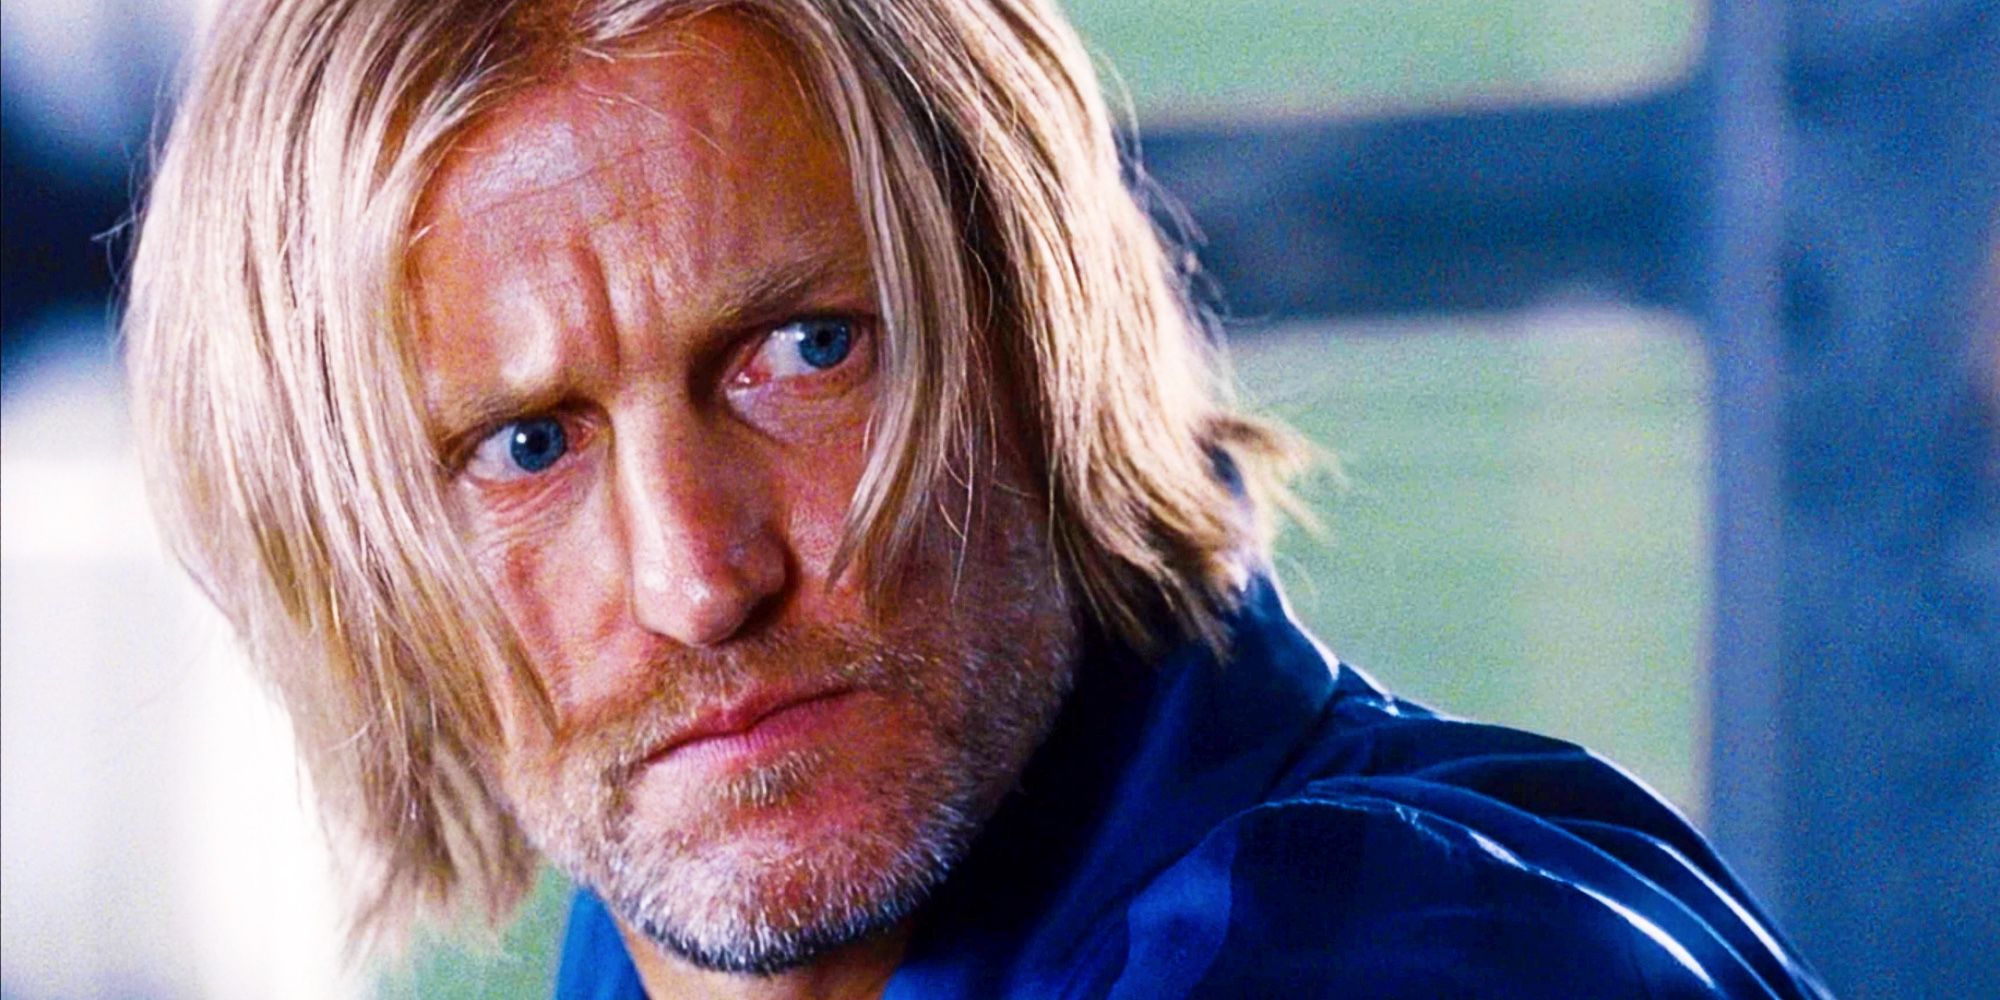 Woody Harrelson as Haymitch Abernathy Glaring in The Hunger Games Catching Fire